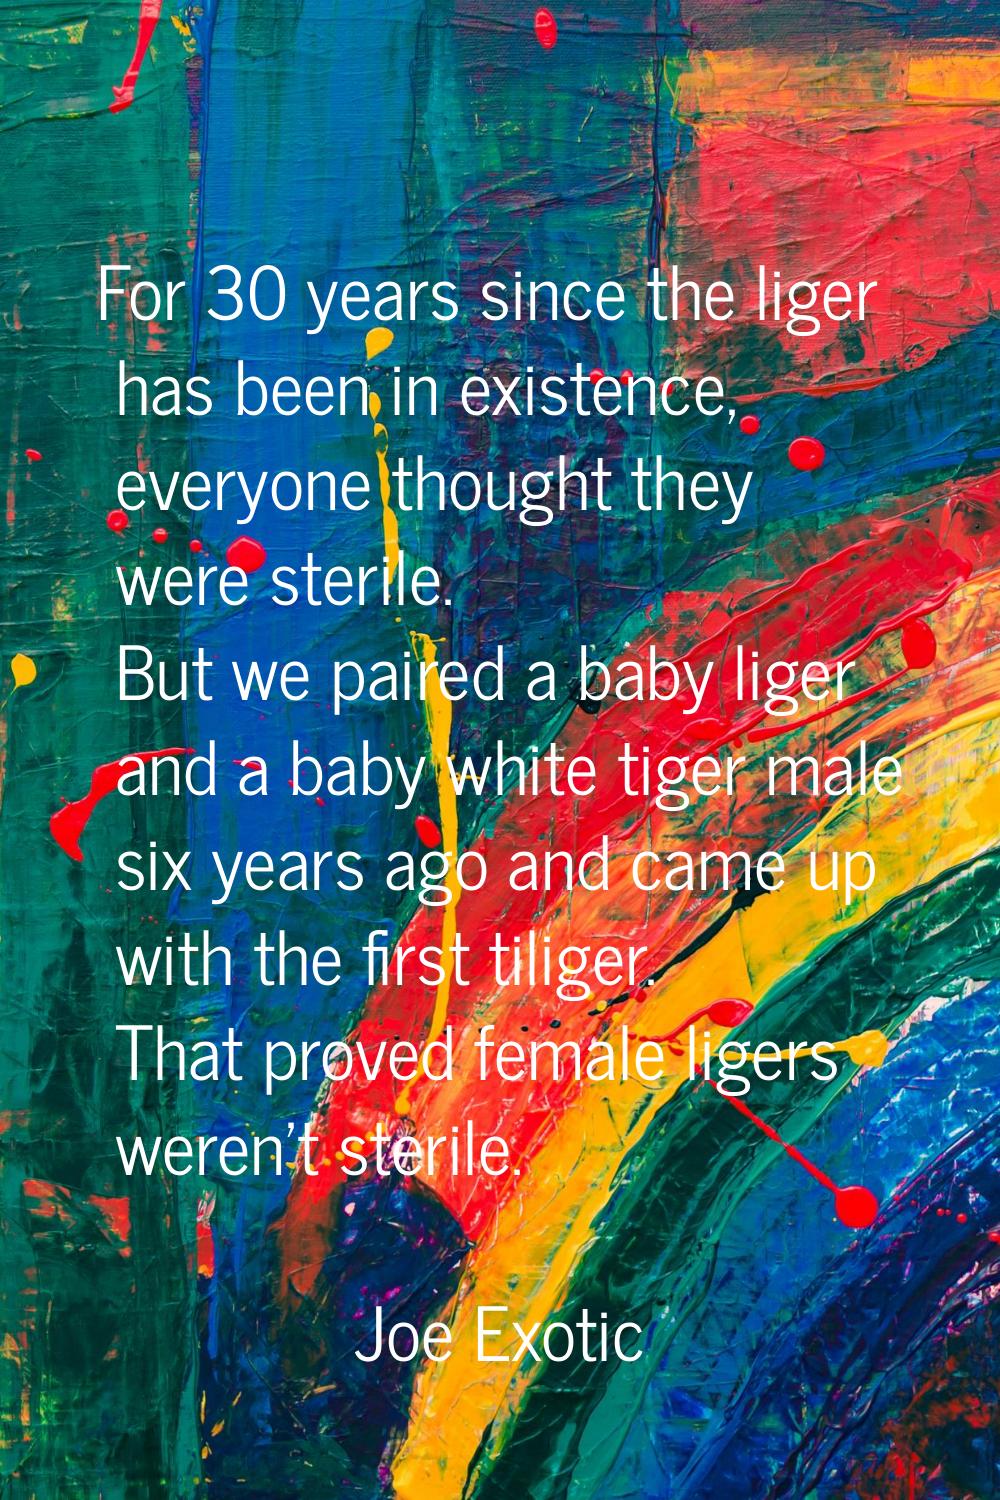 For 30 years since the liger has been in existence, everyone thought they were sterile. But we pair